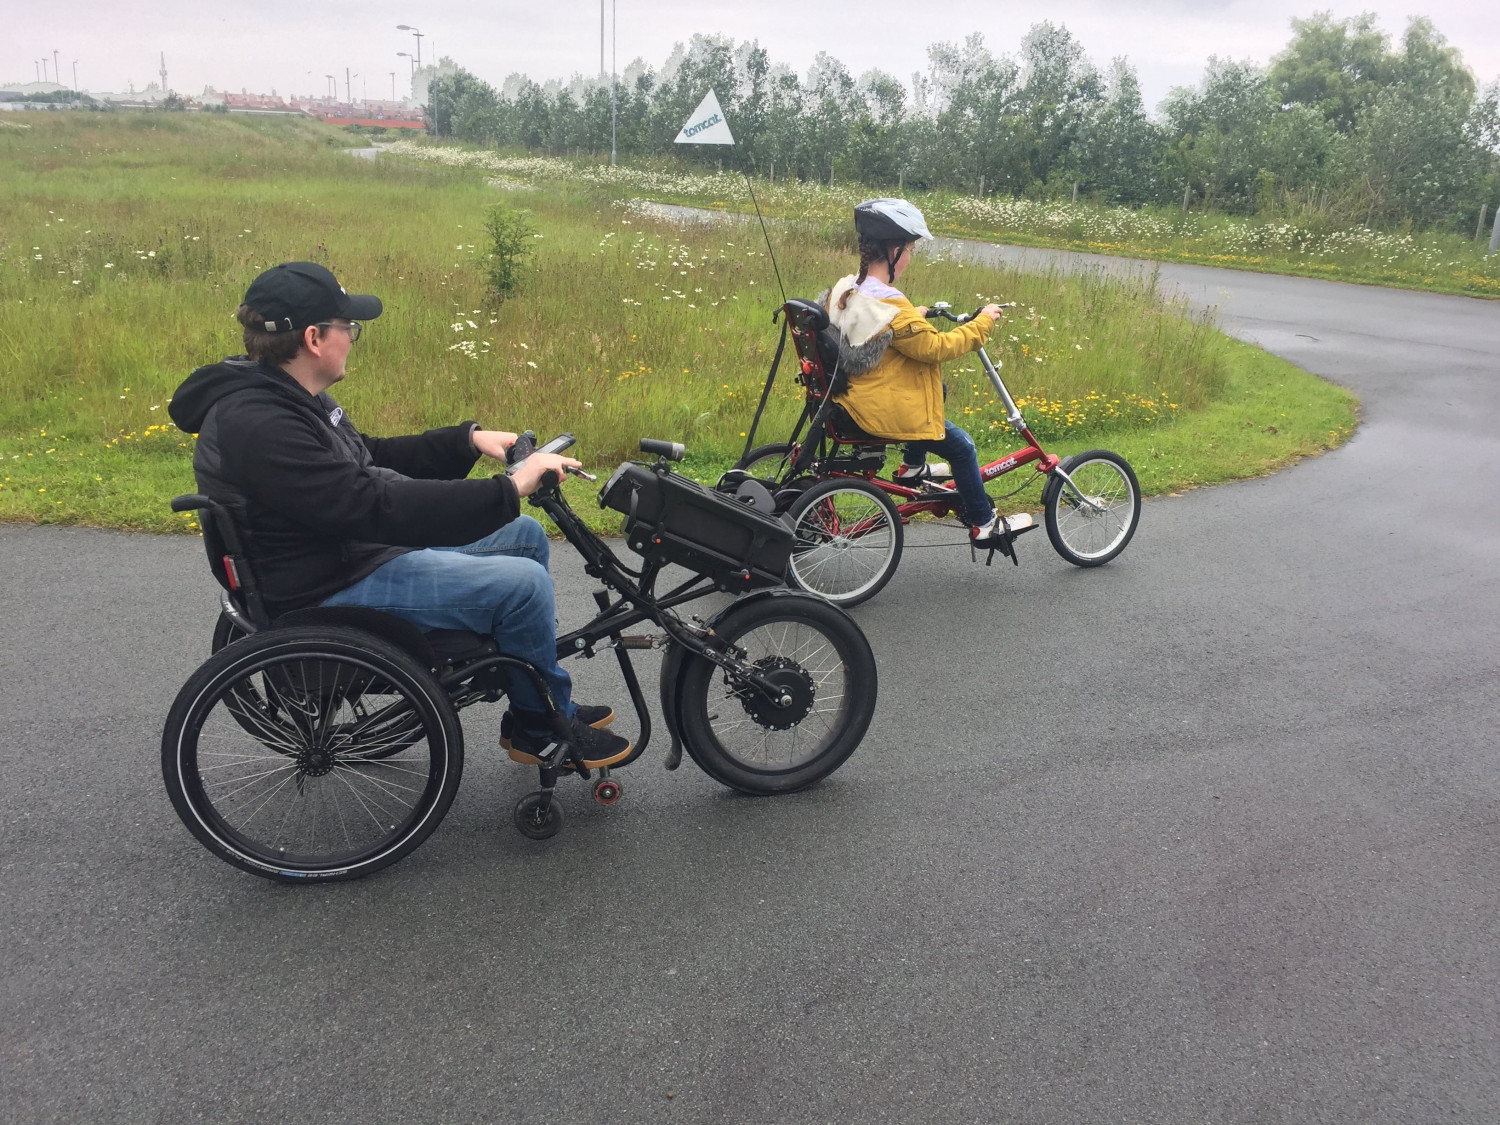 Two adapted cycles